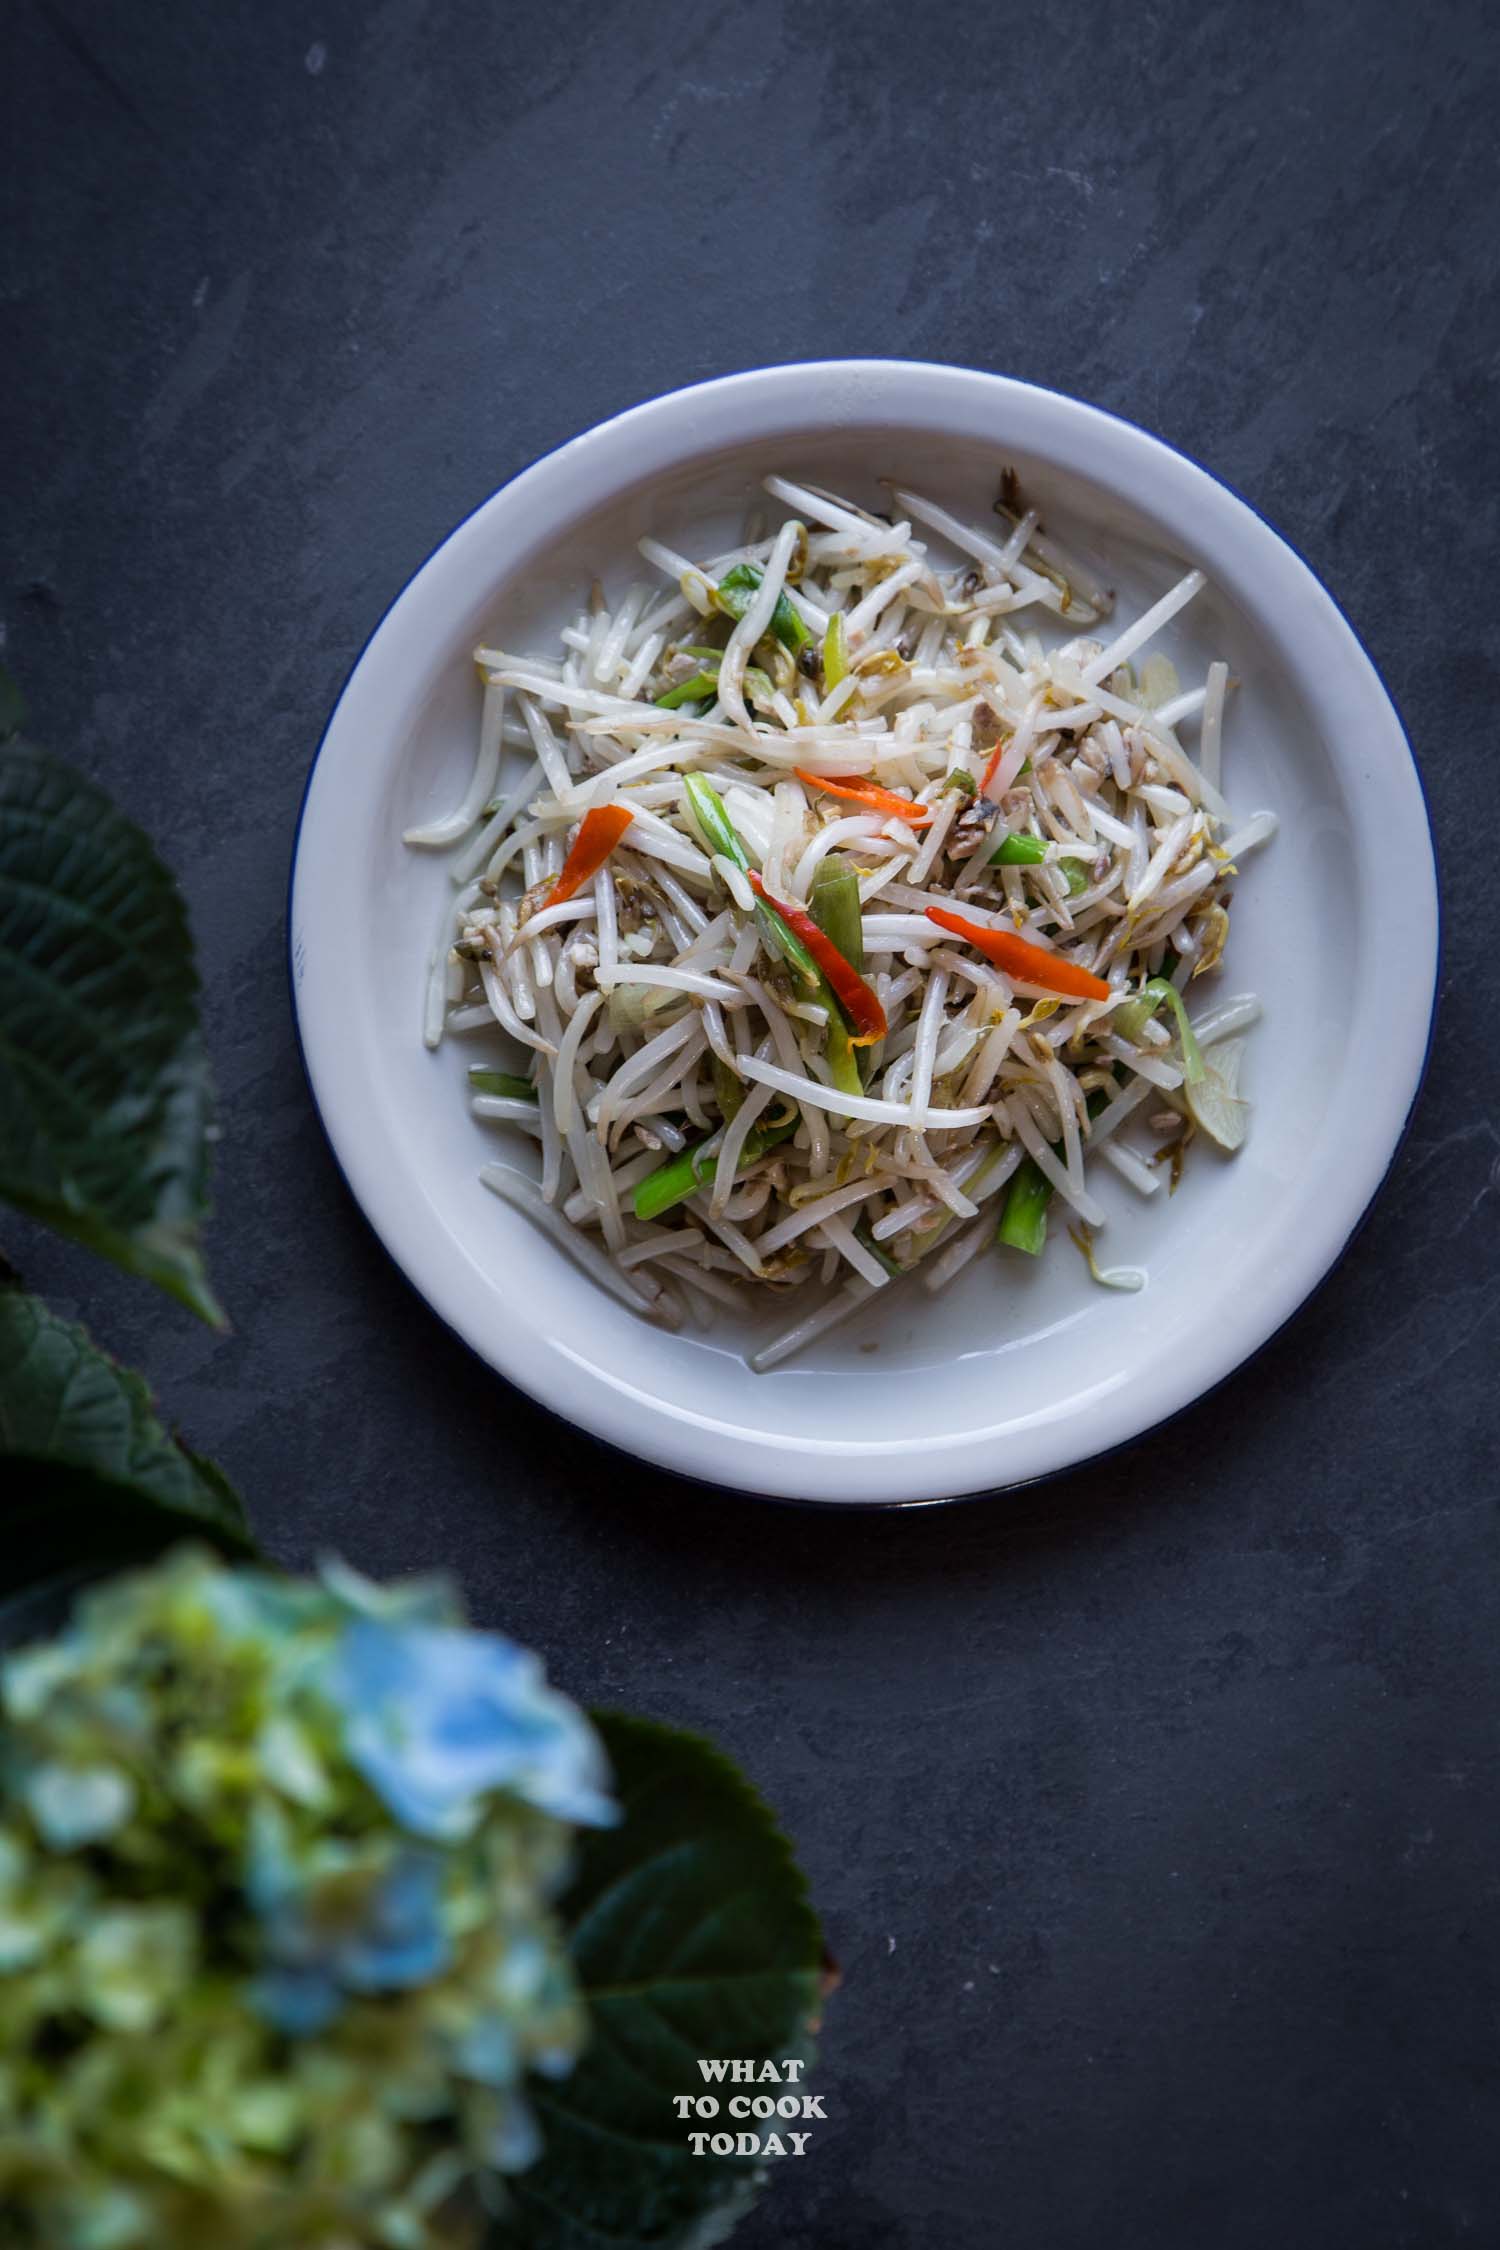 Tumis tauge ikan asin / Stir-fried bean sprouts with salted fish